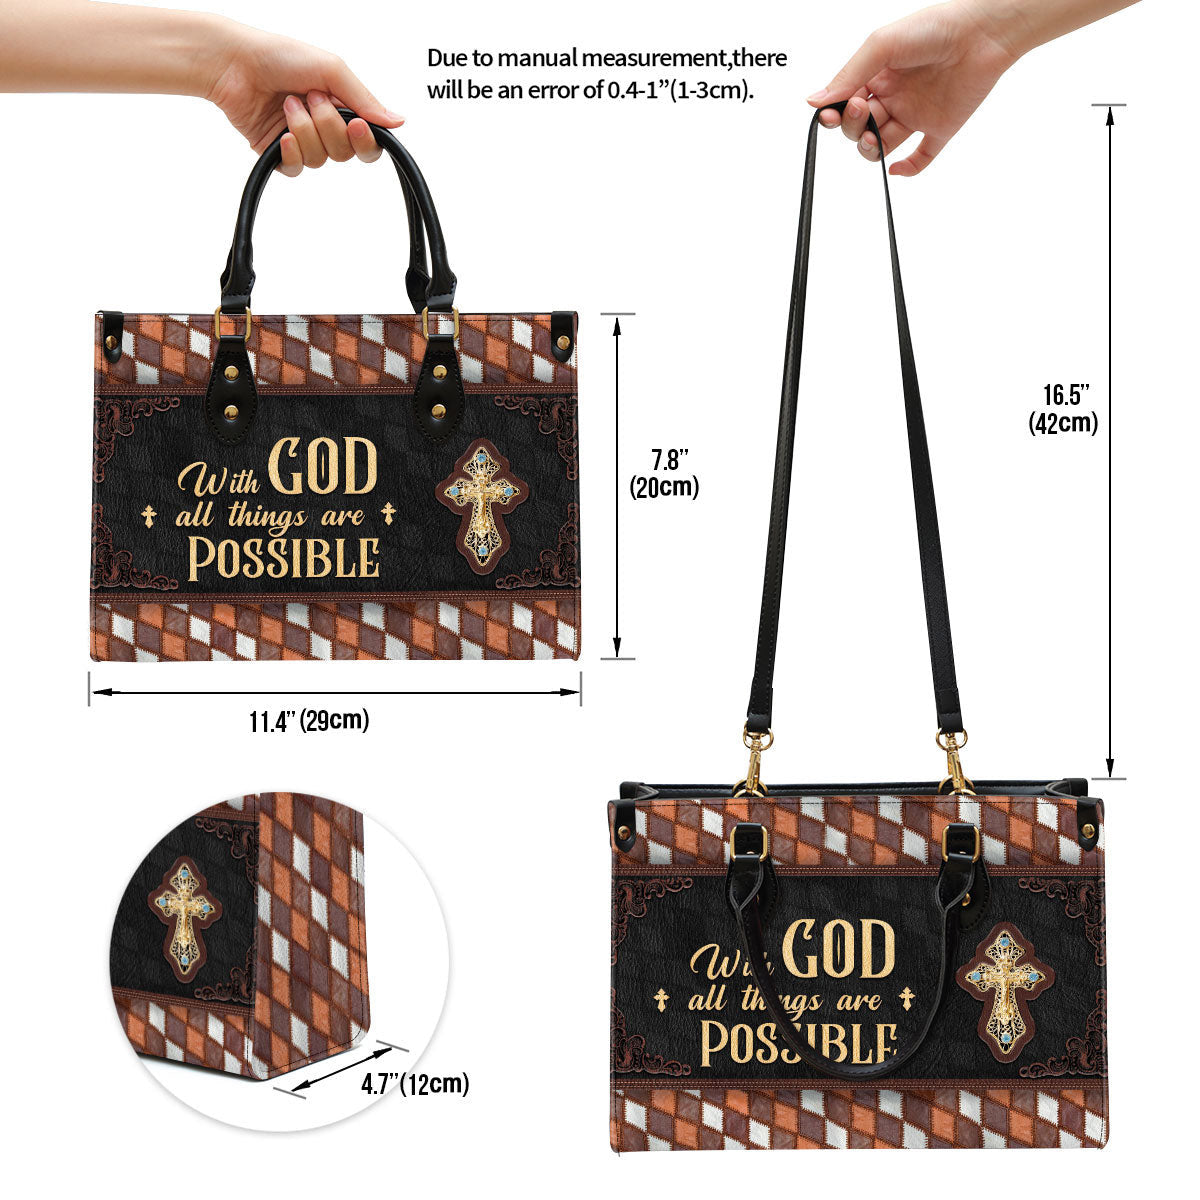 With God All Things Are Possible Cross Leather Handbag - Religious Gifts For Women - Women Pu Leather Bag